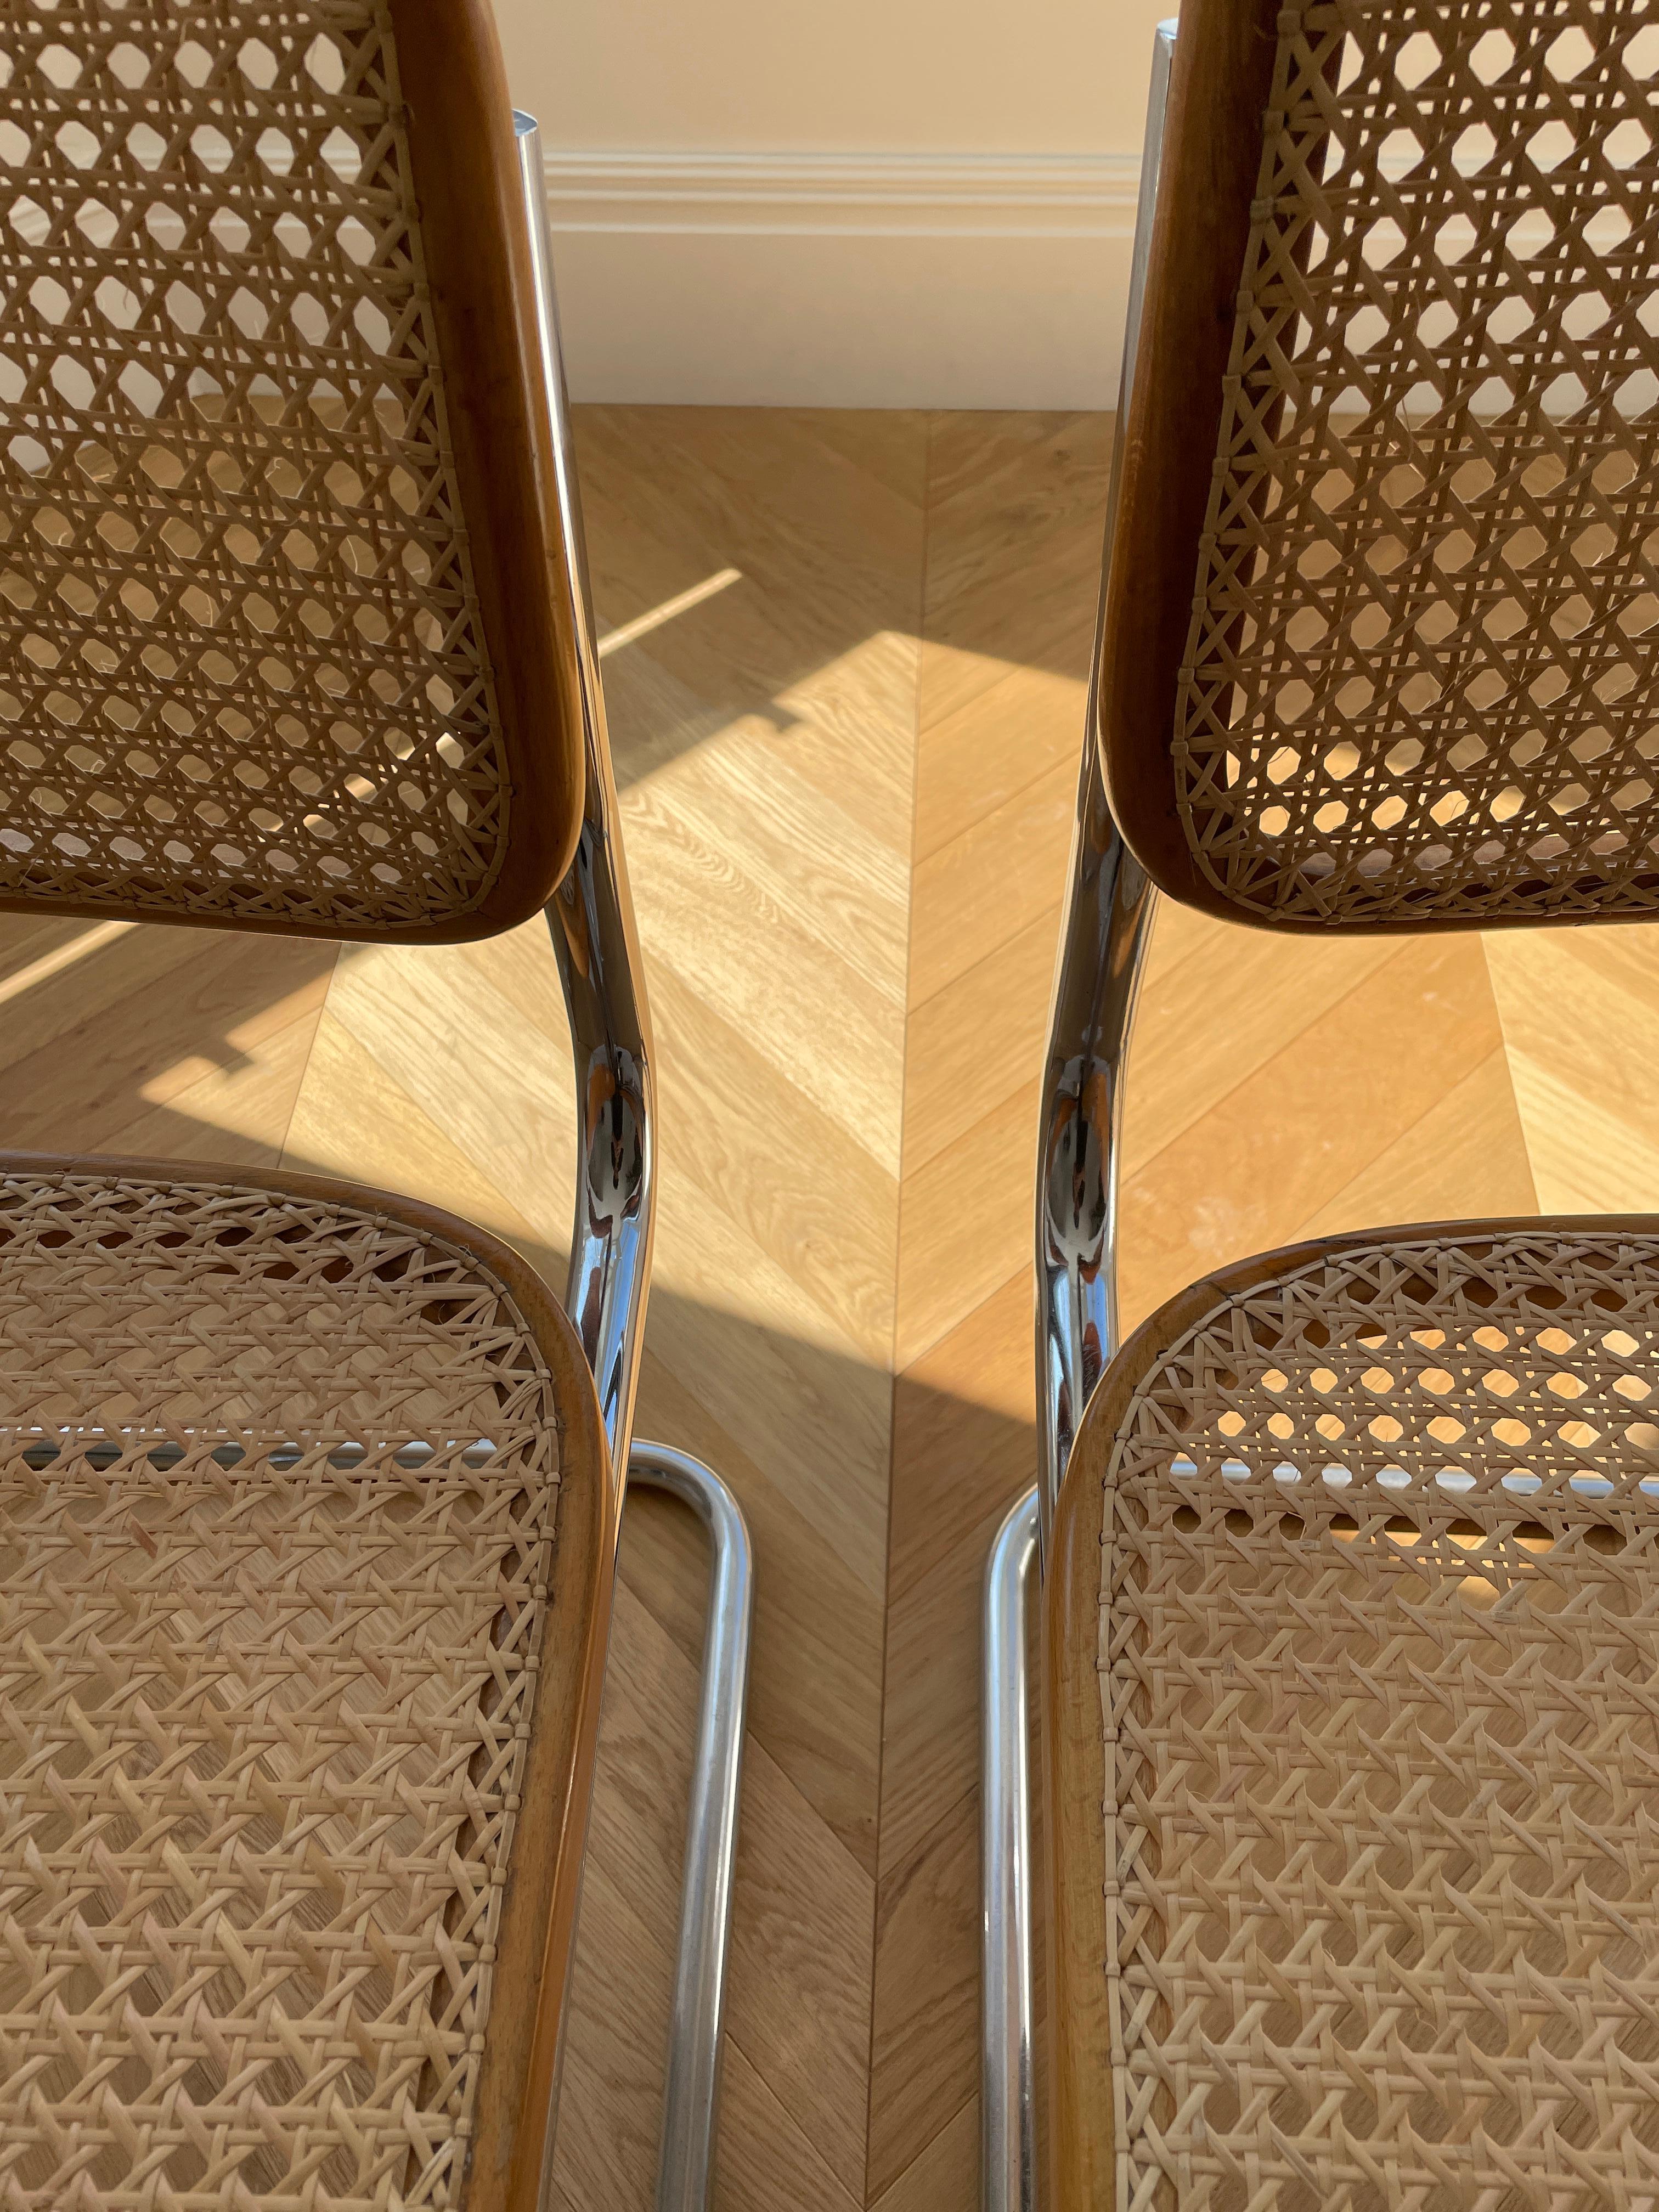 'S32' Cesca Chairs by Marcel Breuer and Gavina In Fair Condition For Sale In London, England